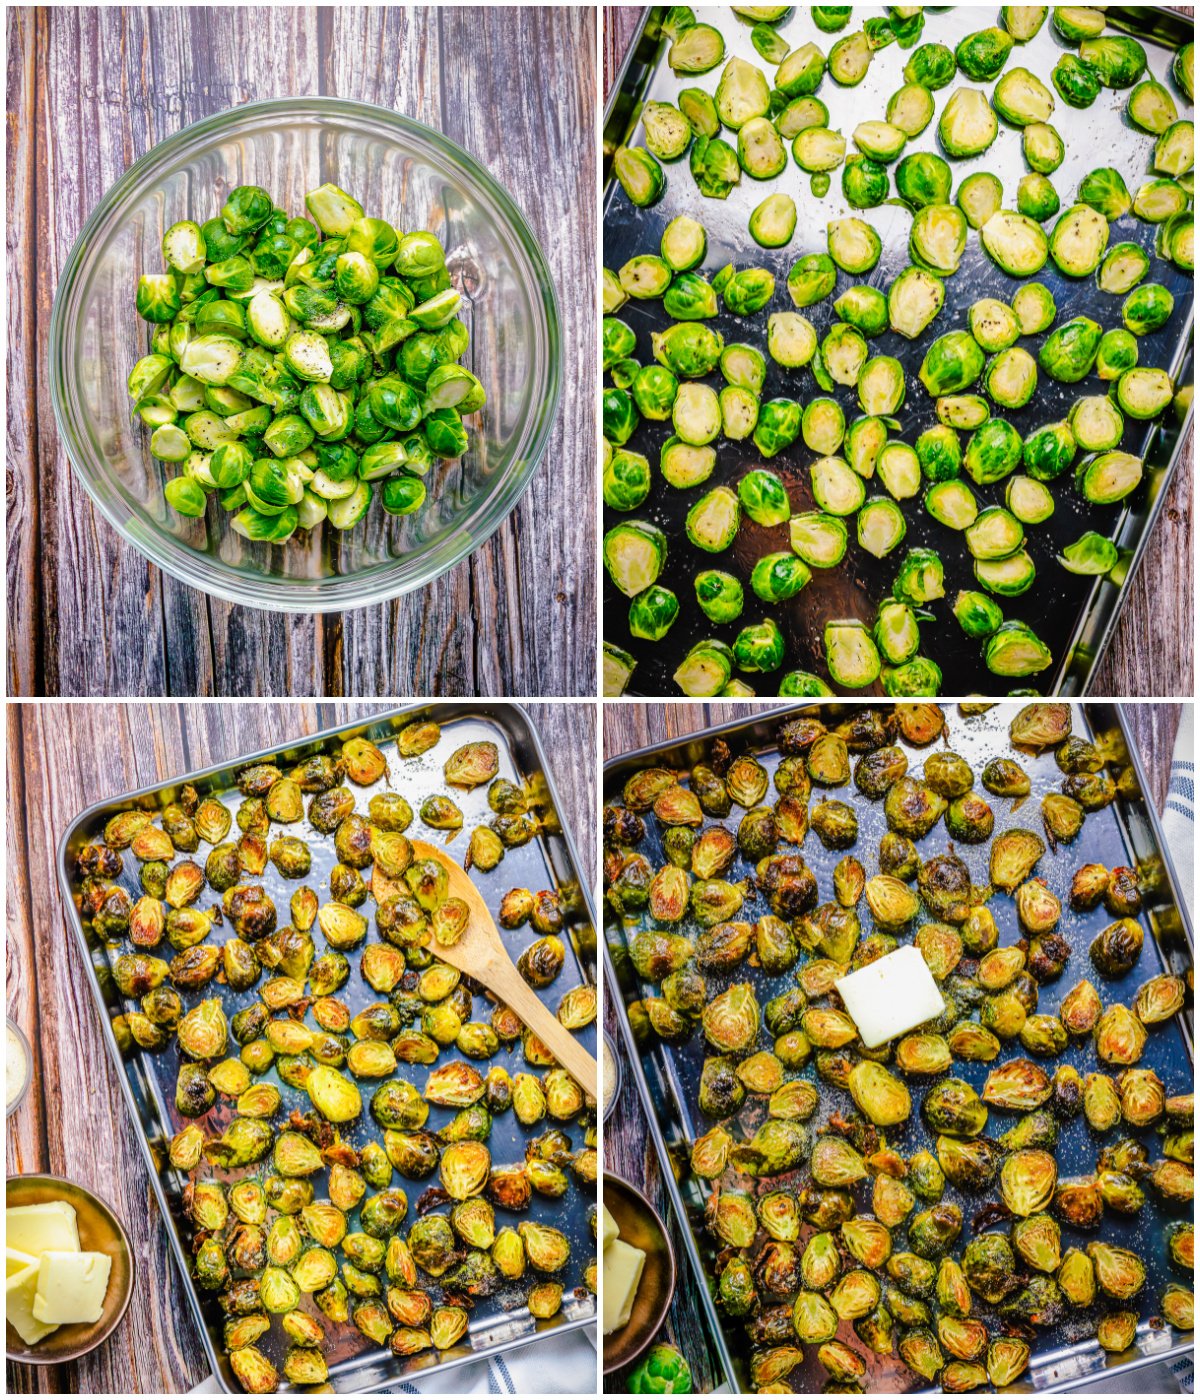 Step by step photos on how to make Oven Roasted Brussel Sprouts.